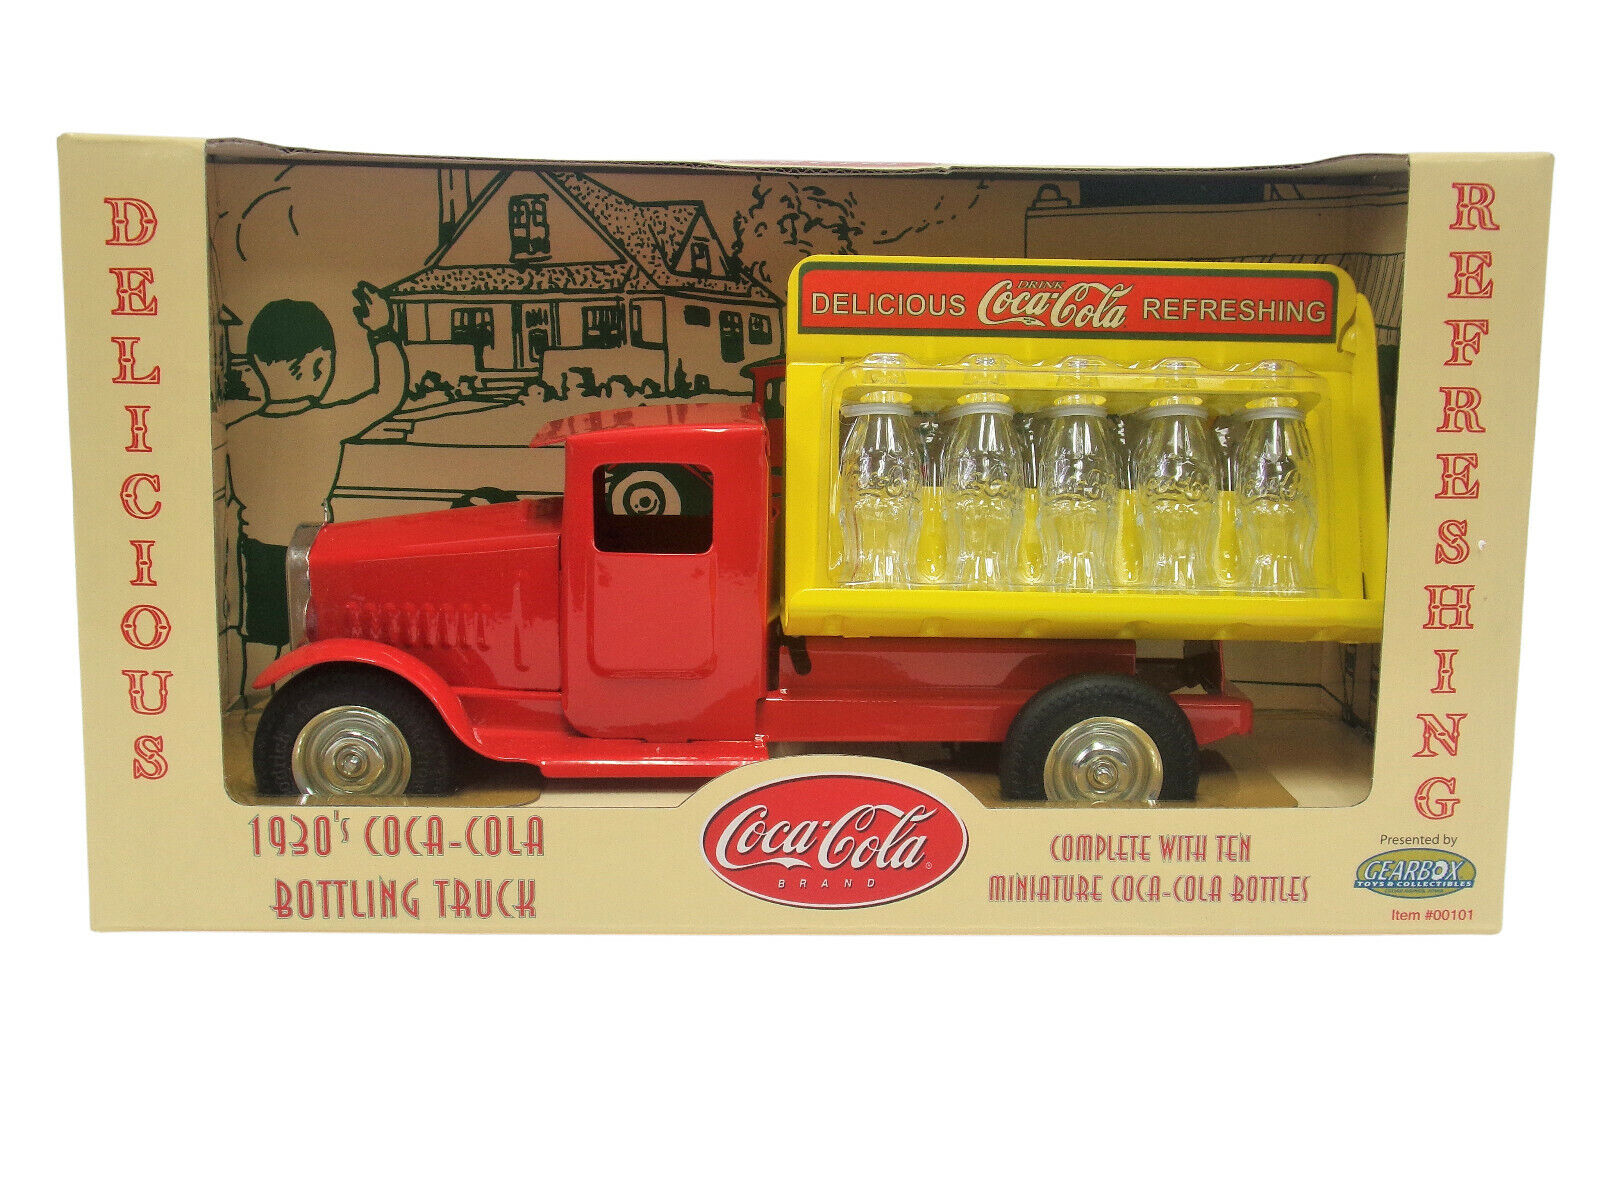 Vintage 1930's Coca-Cola Bottling Truck , Toy / Collectible